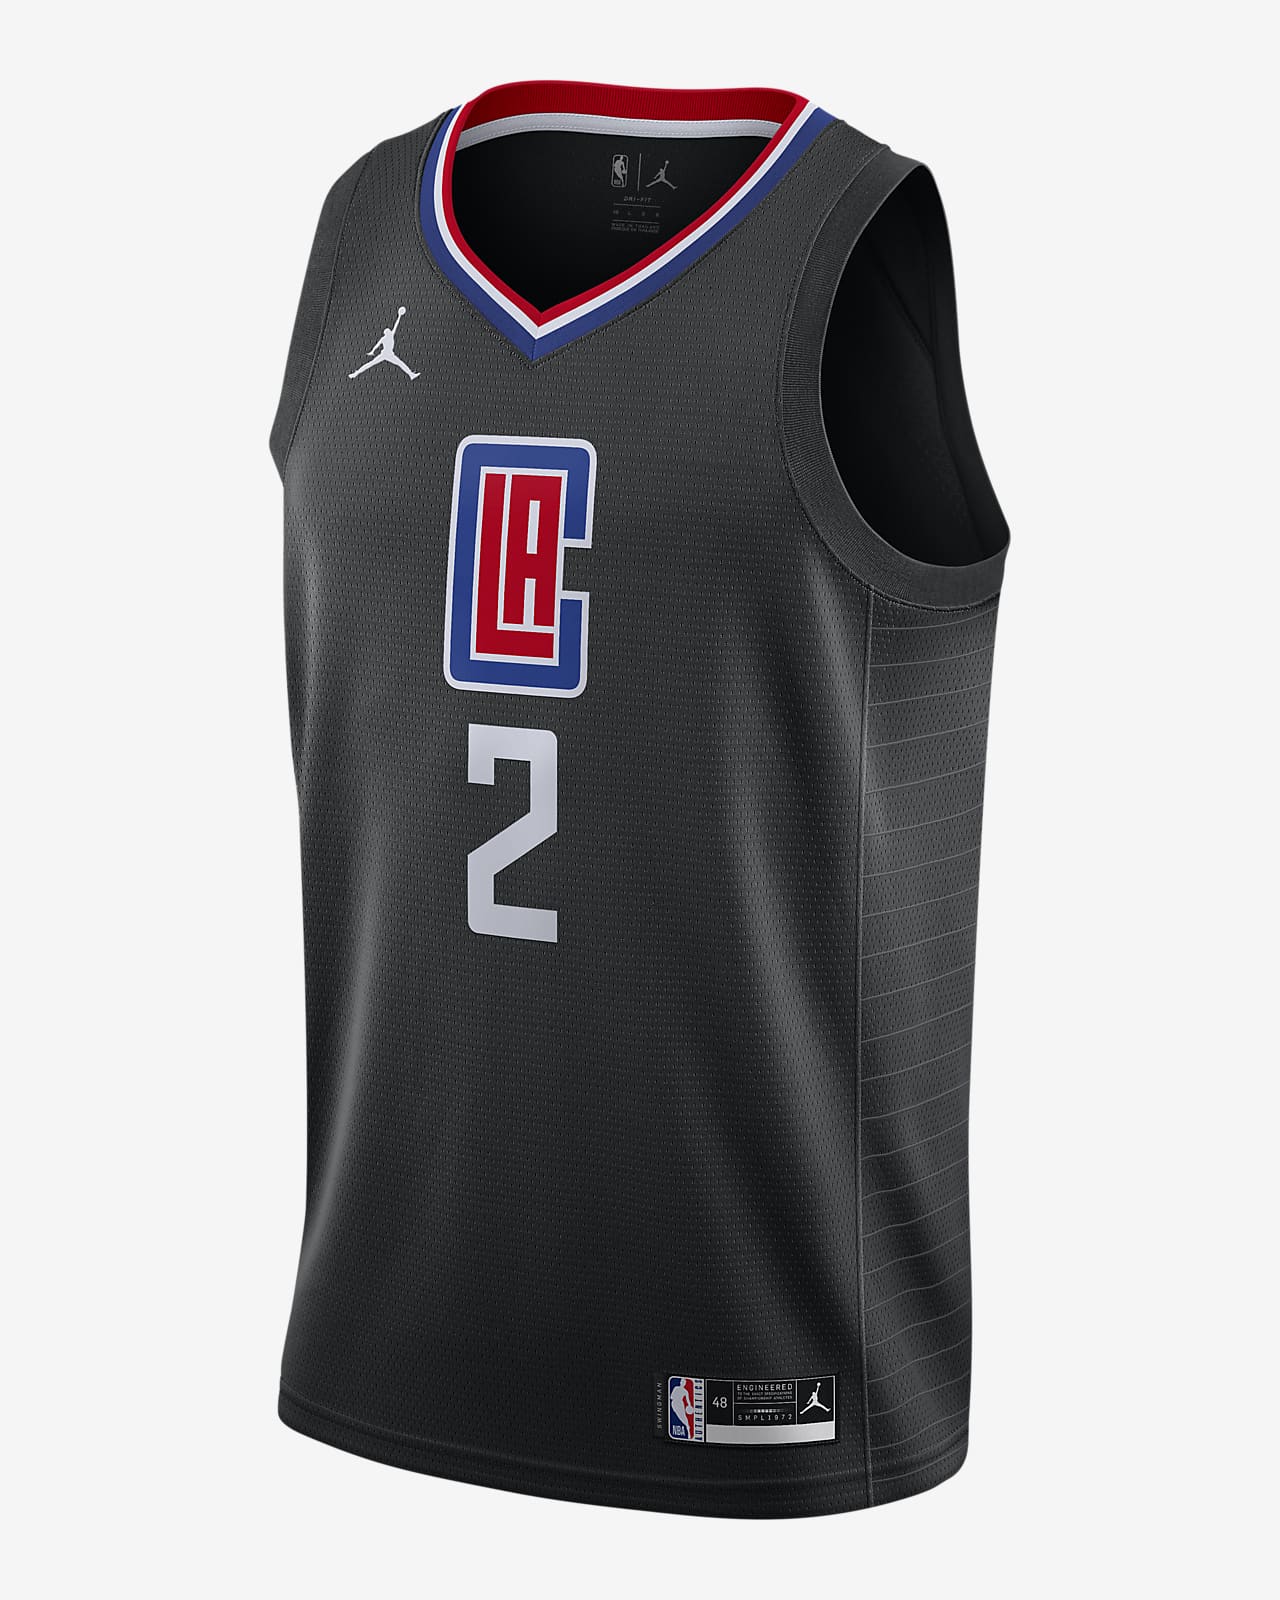 clippers 2020 jersey